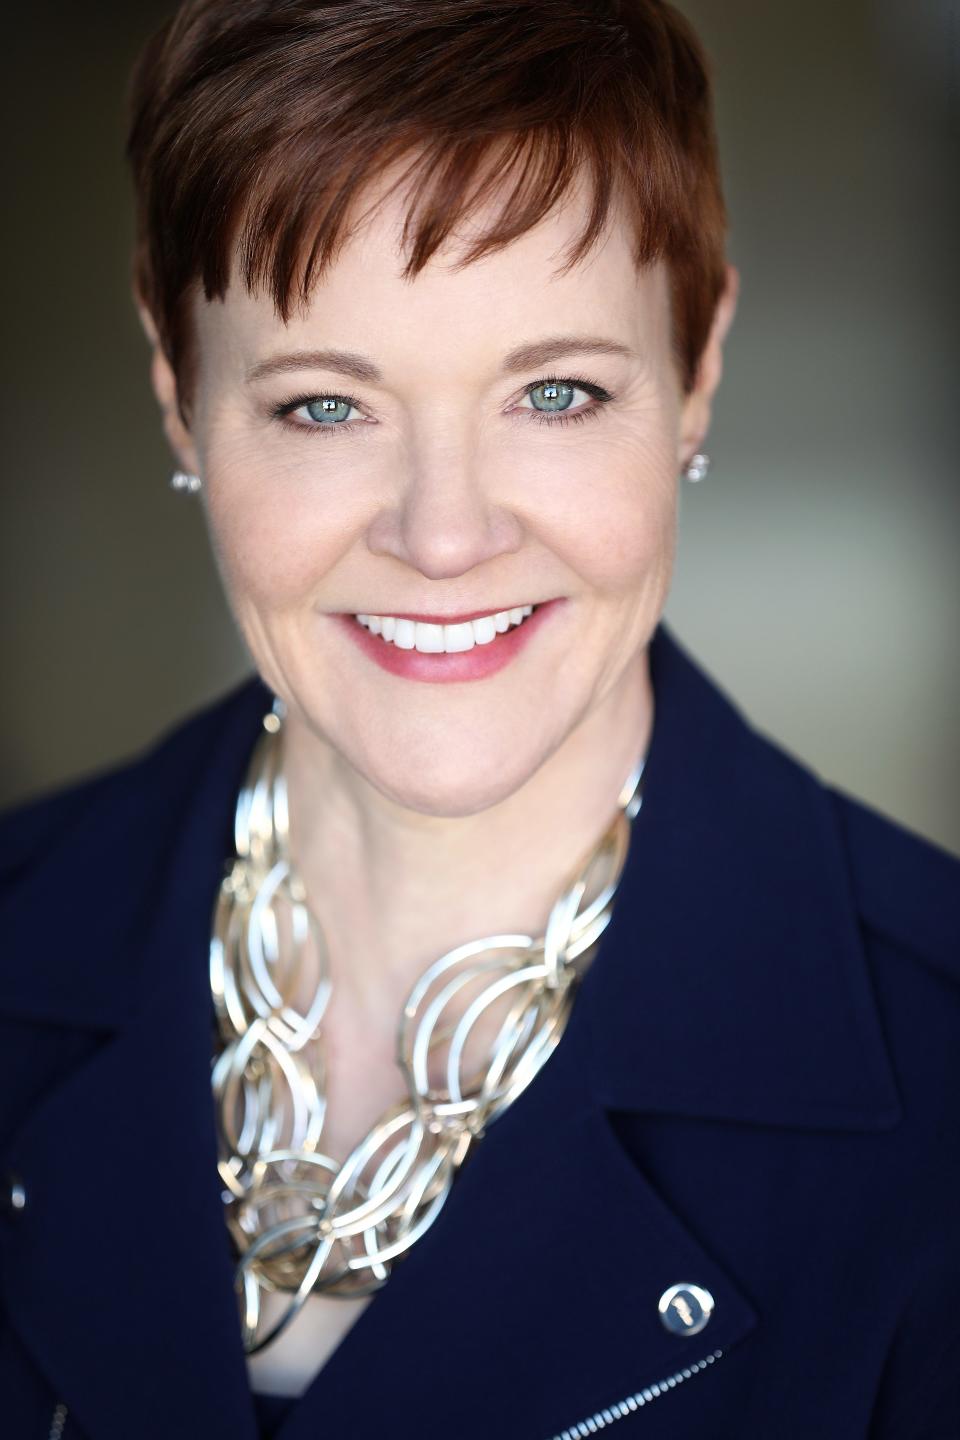 Rachel Moore, president and CEO of The Music Center in Los Angeles